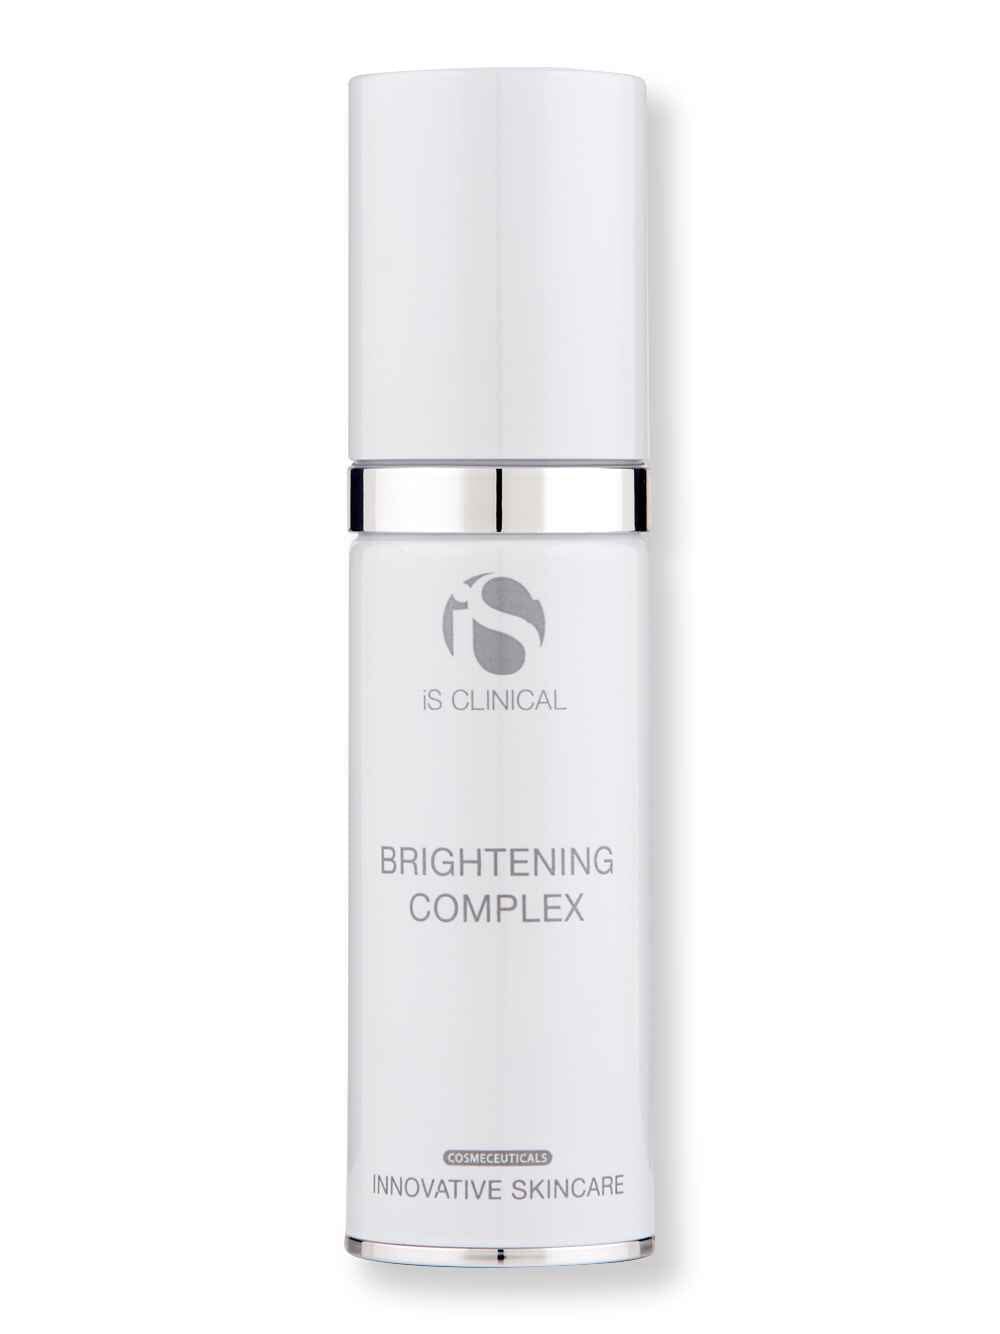 iS Clinical iS Clinical Brightening Complex 1 oz30 g Skin Care Treatments 